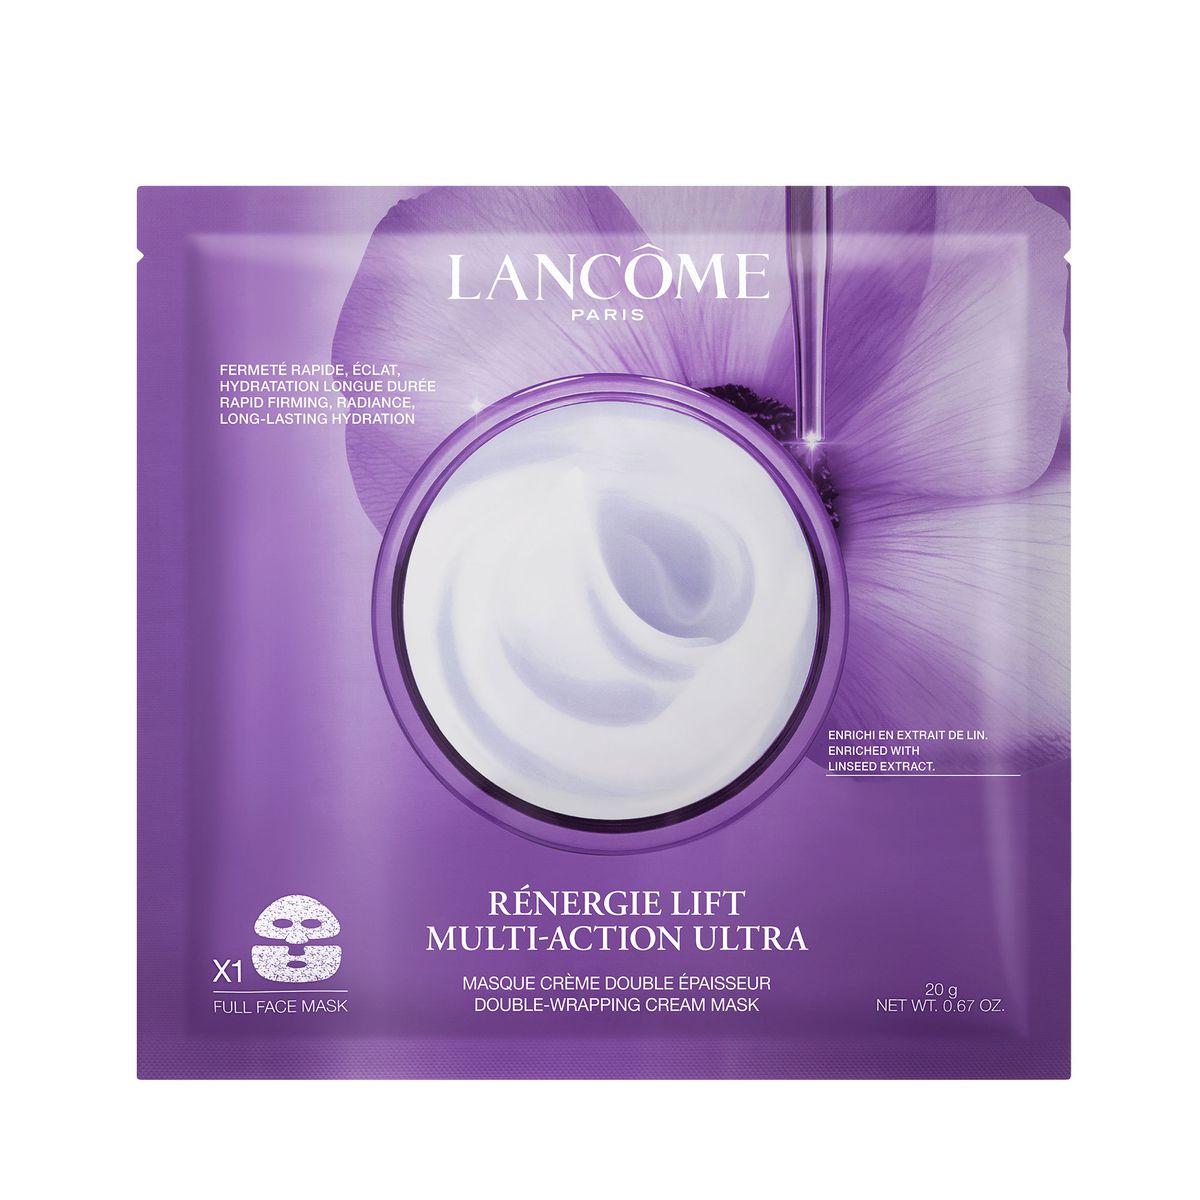 Lancôme Rènergie Lift Multi-Action Ultra Double-Wrapping Cream Face Mask